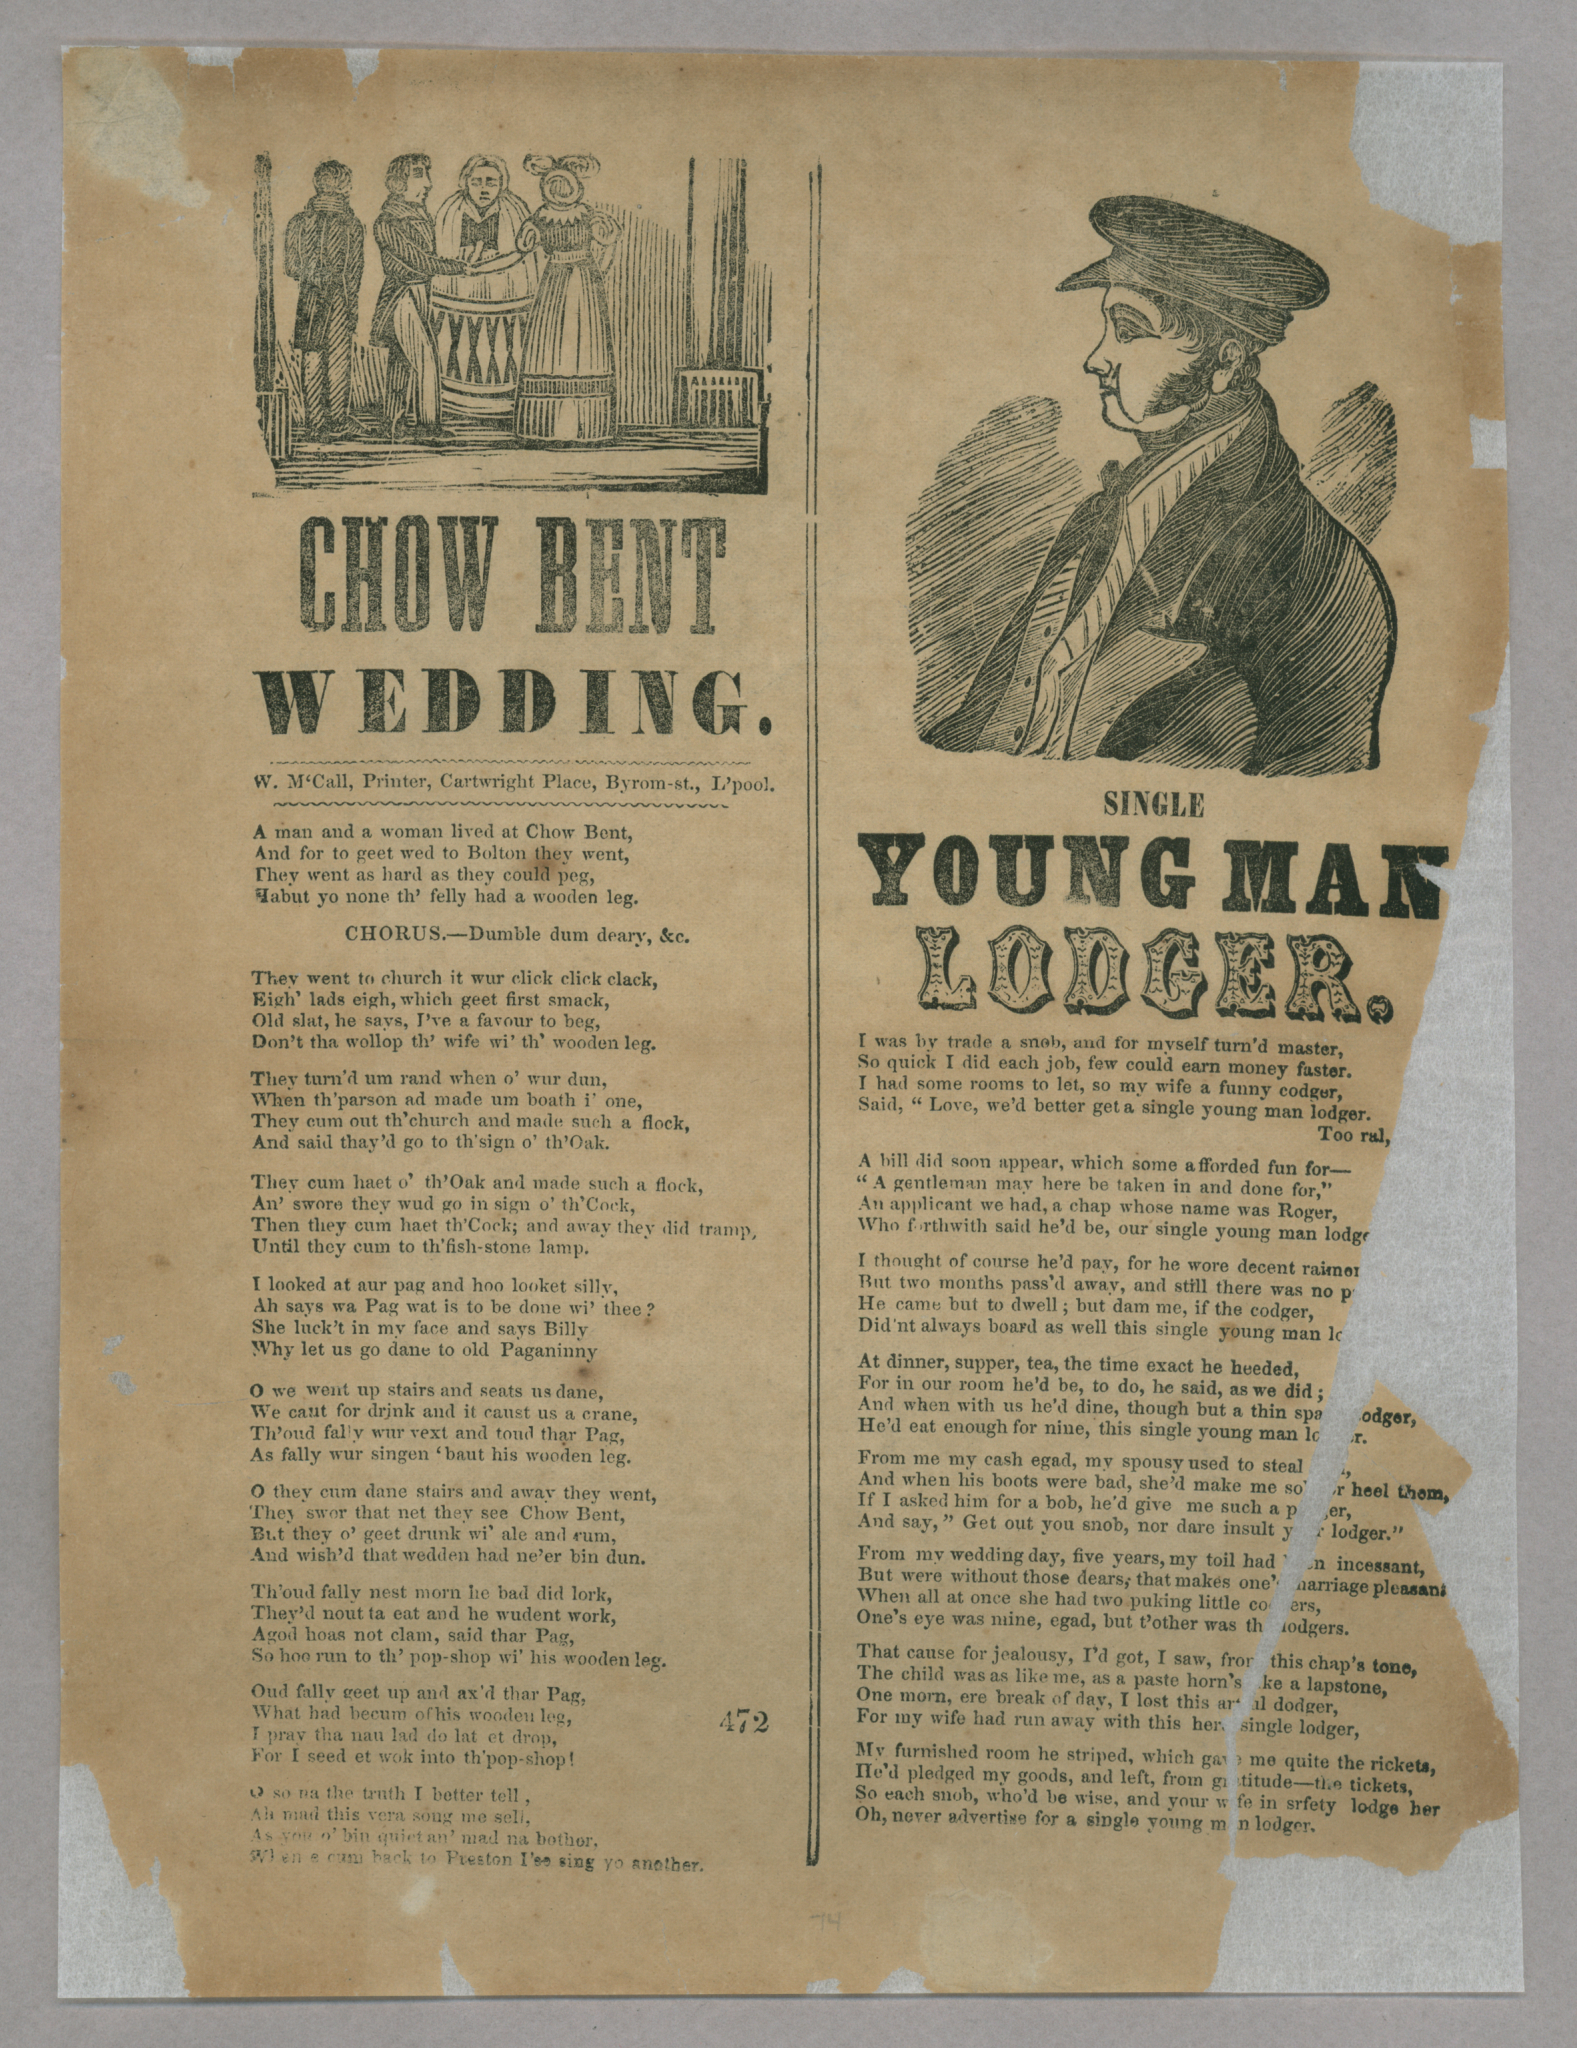 &quot;Chow Bent Wedding,&quot; and &quot;Single Young Man Lodger&quot;